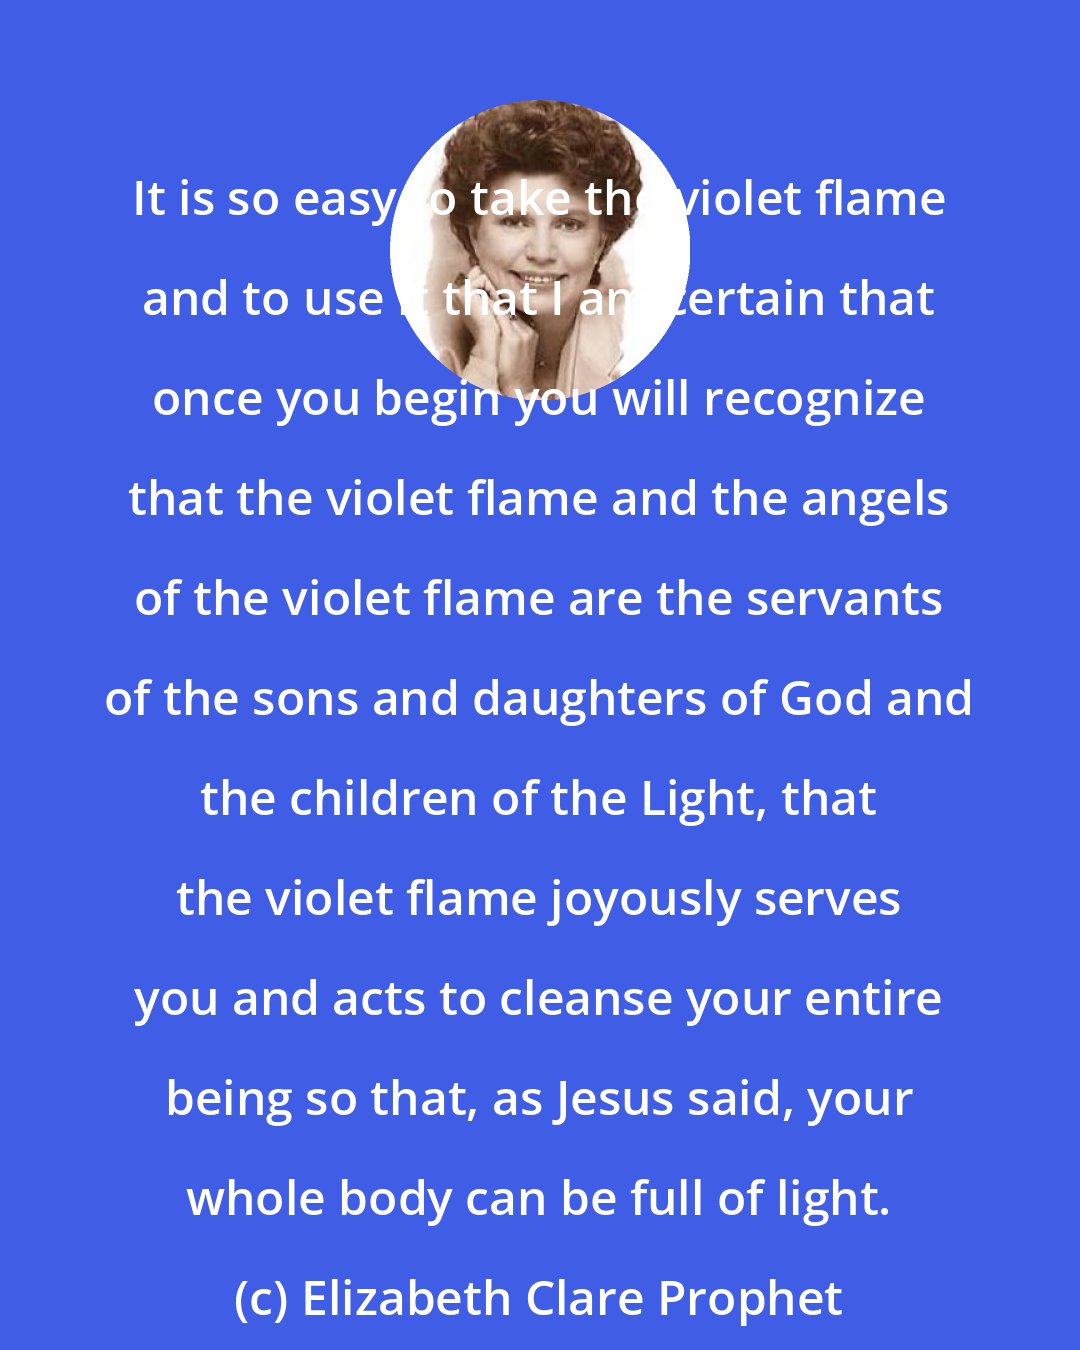 Elizabeth Clare Prophet: It is so easy to take the violet flame and to use it that I am certain that once you begin you will recognize that the violet flame and the angels of the violet flame are the servants of the sons and daughters of God and the children of the Light, that the violet flame joyously serves you and acts to cleanse your entire being so that, as Jesus said, your whole body can be full of light.